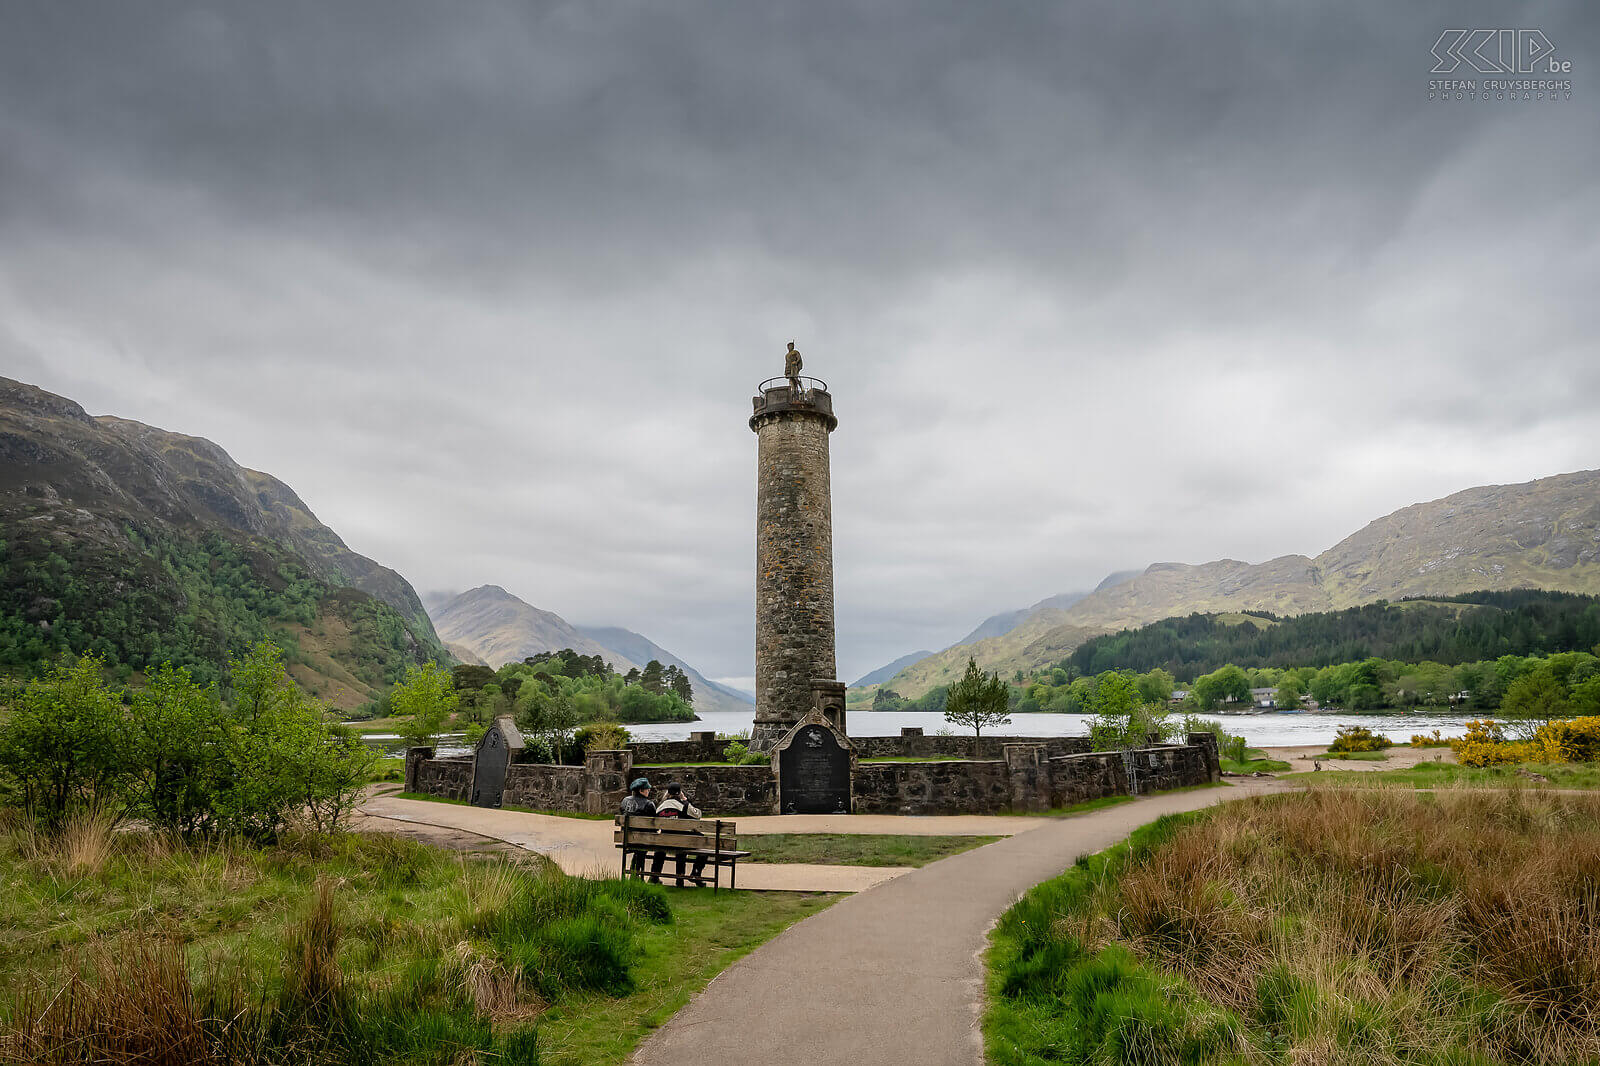 Glenfinnan Monument The village of Glenfinnan is located on the road between Fort William and Mallaig. This is a very beautiful place where Bonnie Prince Charlie raised his banner on August 19, 1745. Many Scottisch clans gathered that day for a final heroic, but ultimately tragic battle against the English. On the banks of the beautiful Loch Shiel stands the 'Lone Highlander' monument in memory of the last Jacobite uprising. Stefan Cruysberghs